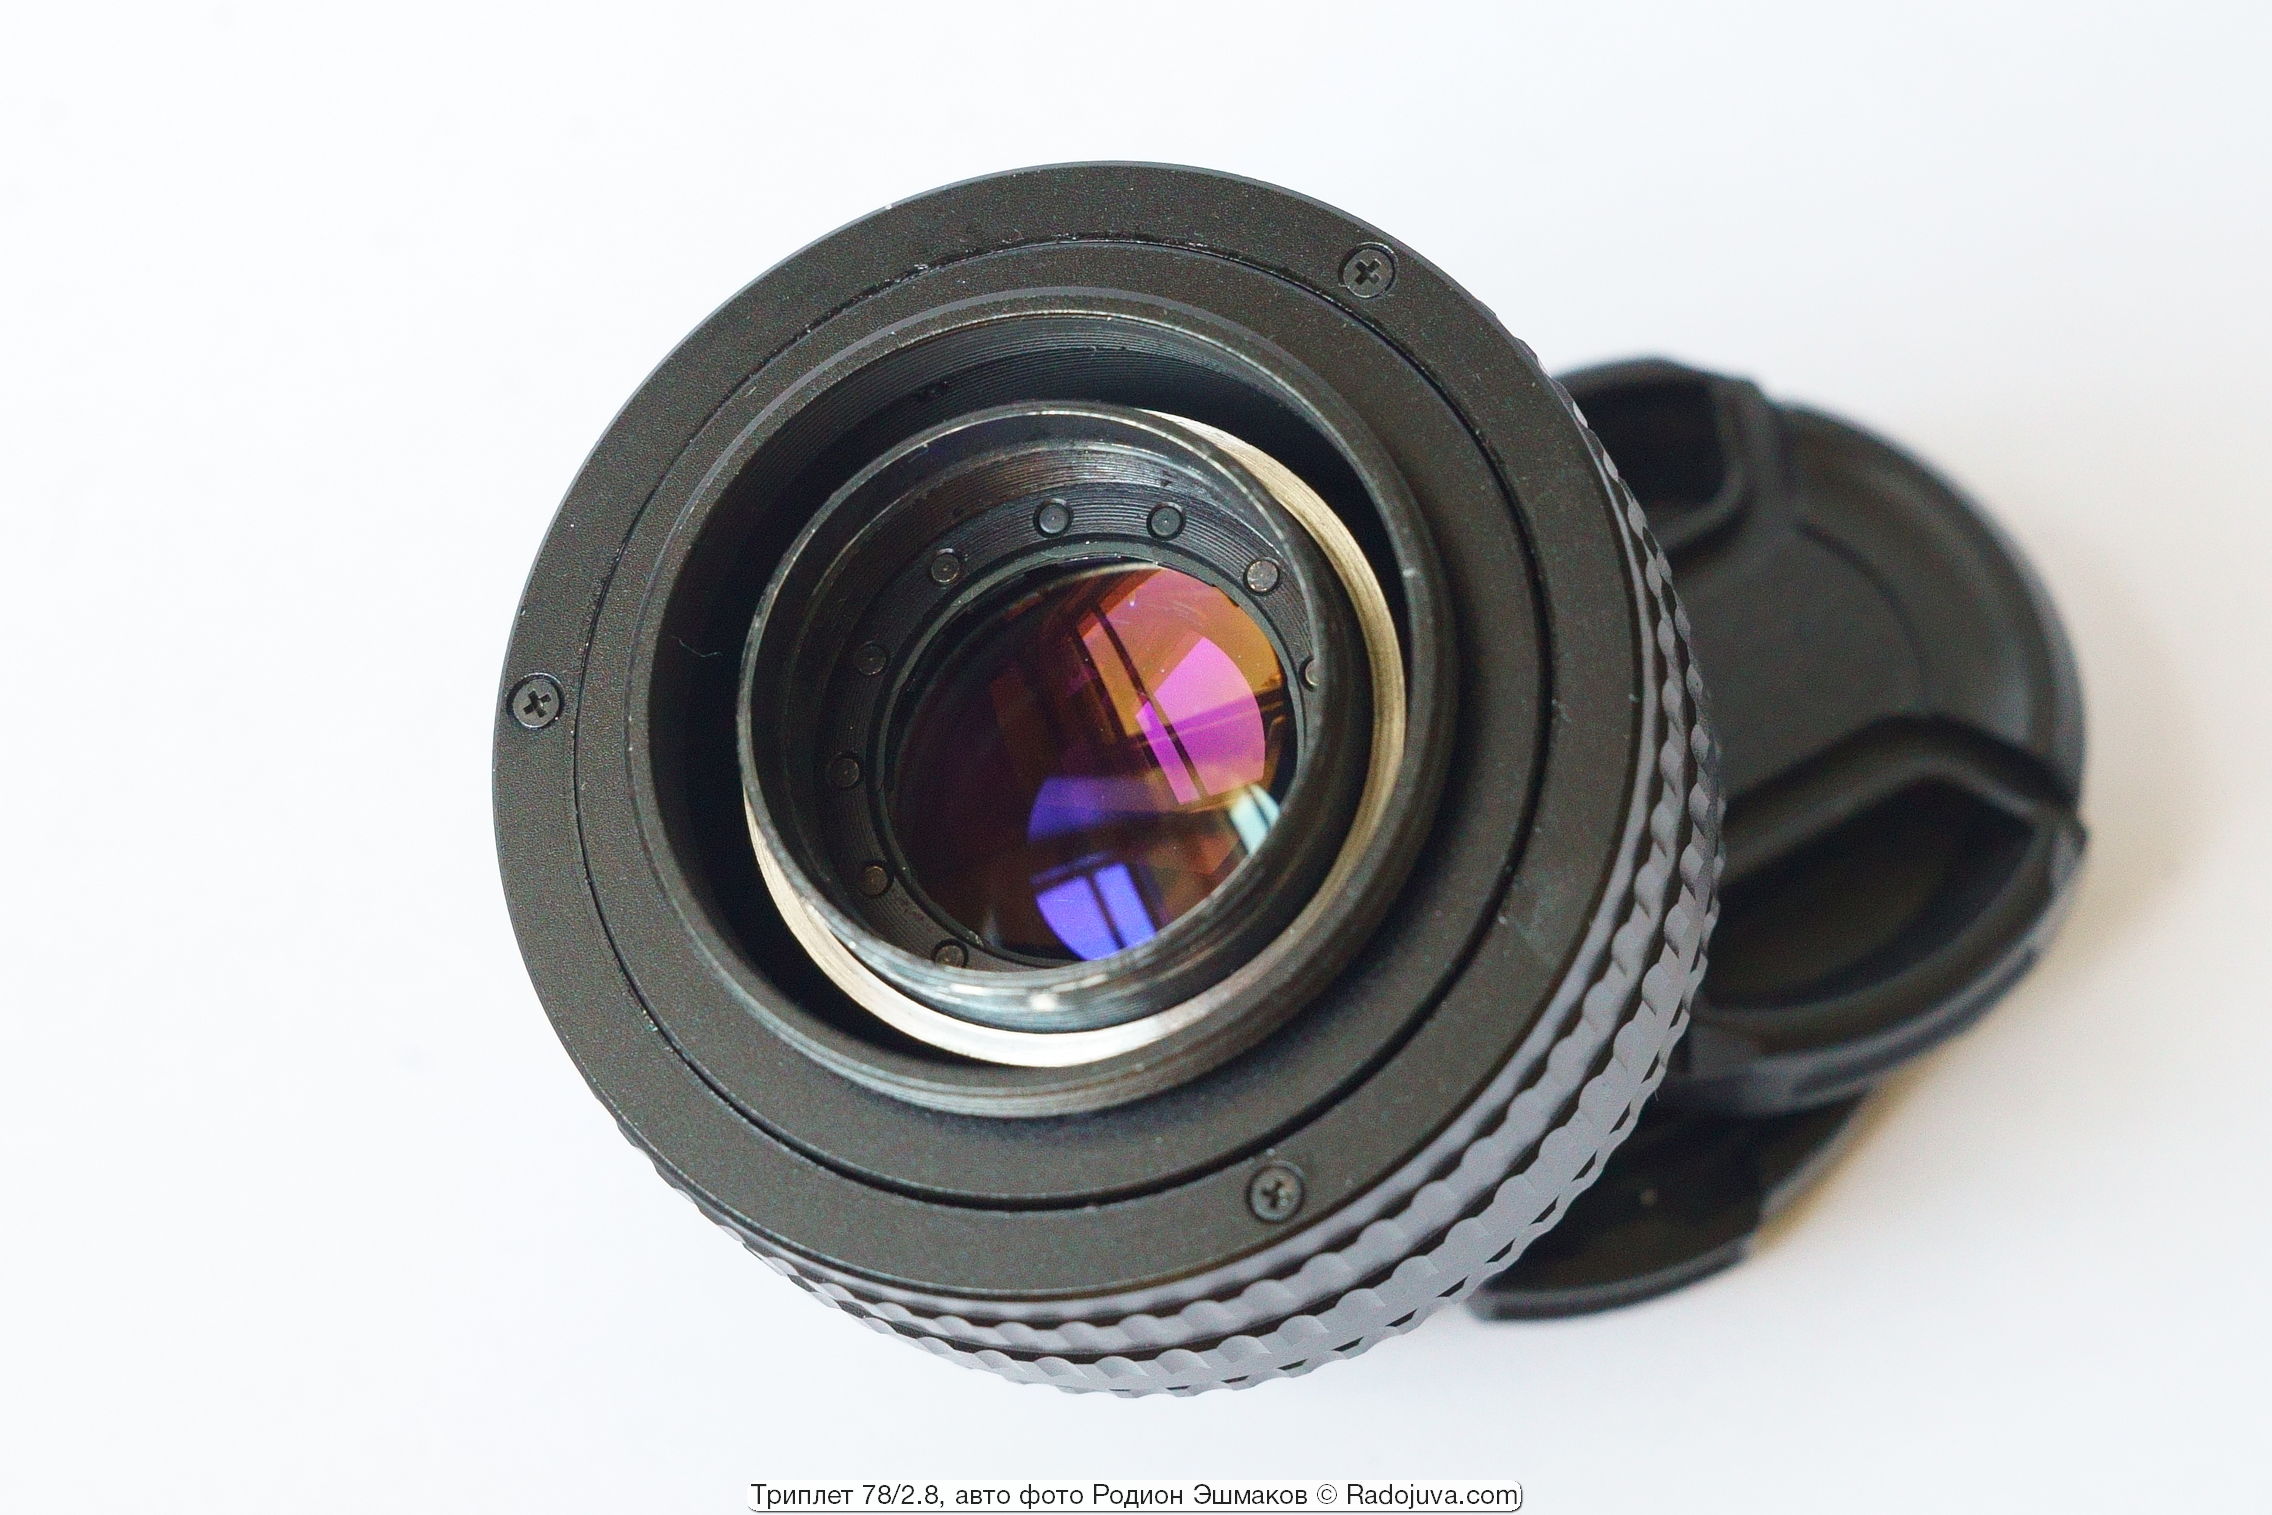 In terms of diameter, the diaphragm from Jupiter-3 is suitable for Triplet 78 / 2.8 better than that of Helios-44.